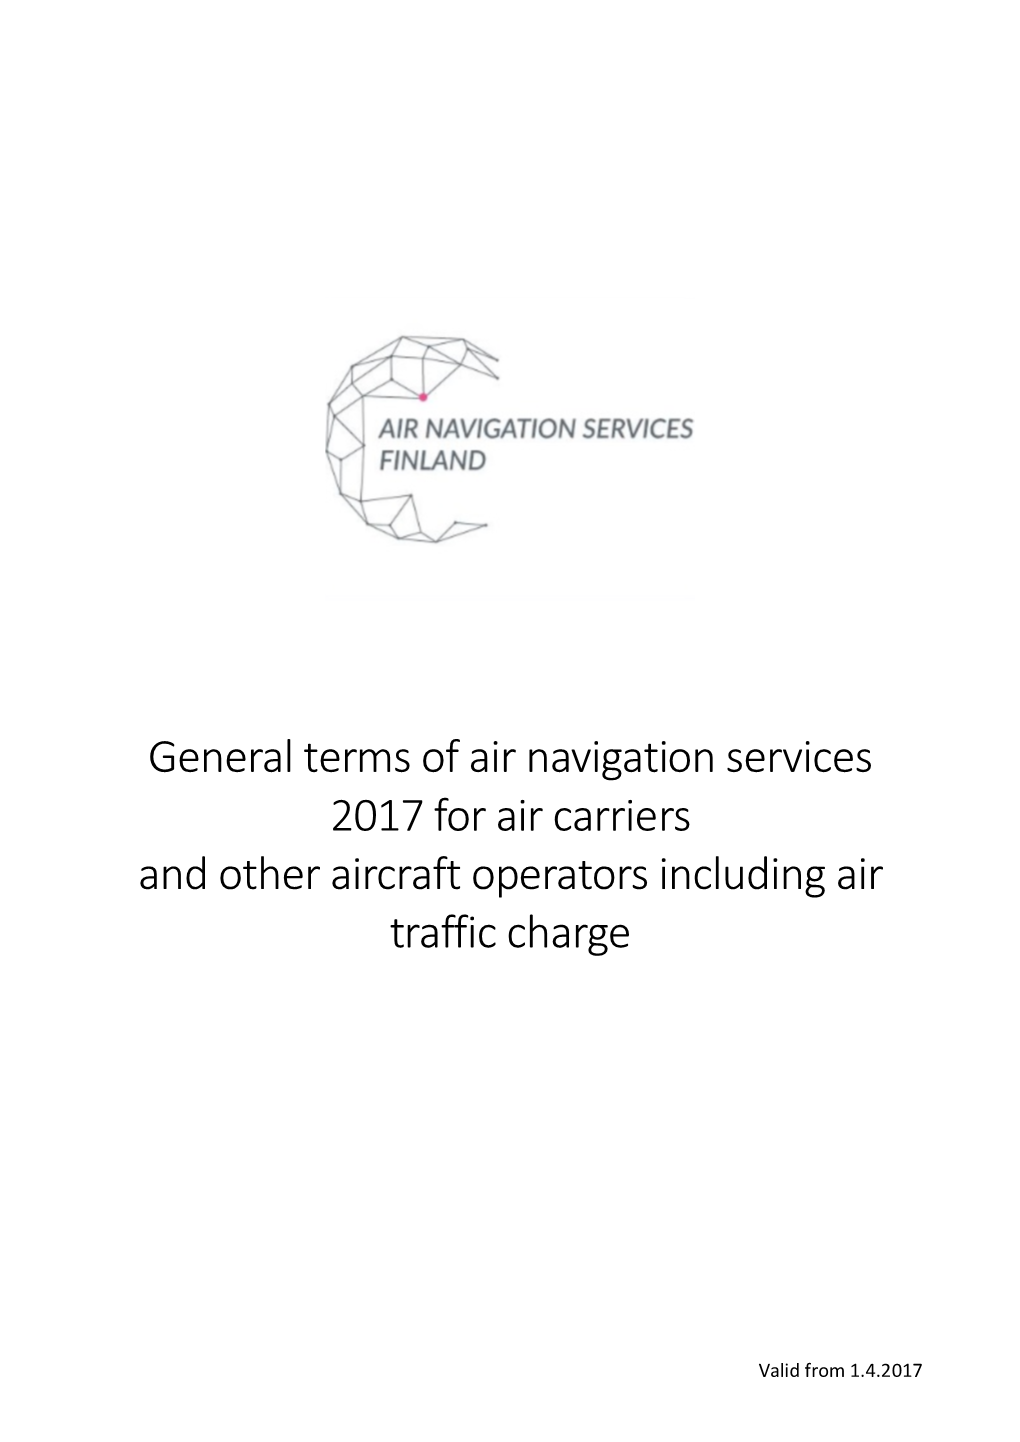 General Terms of Air Navigation Services 2017 for Air Carriers and Other Aircraft Operators Including Air Traffic Charge